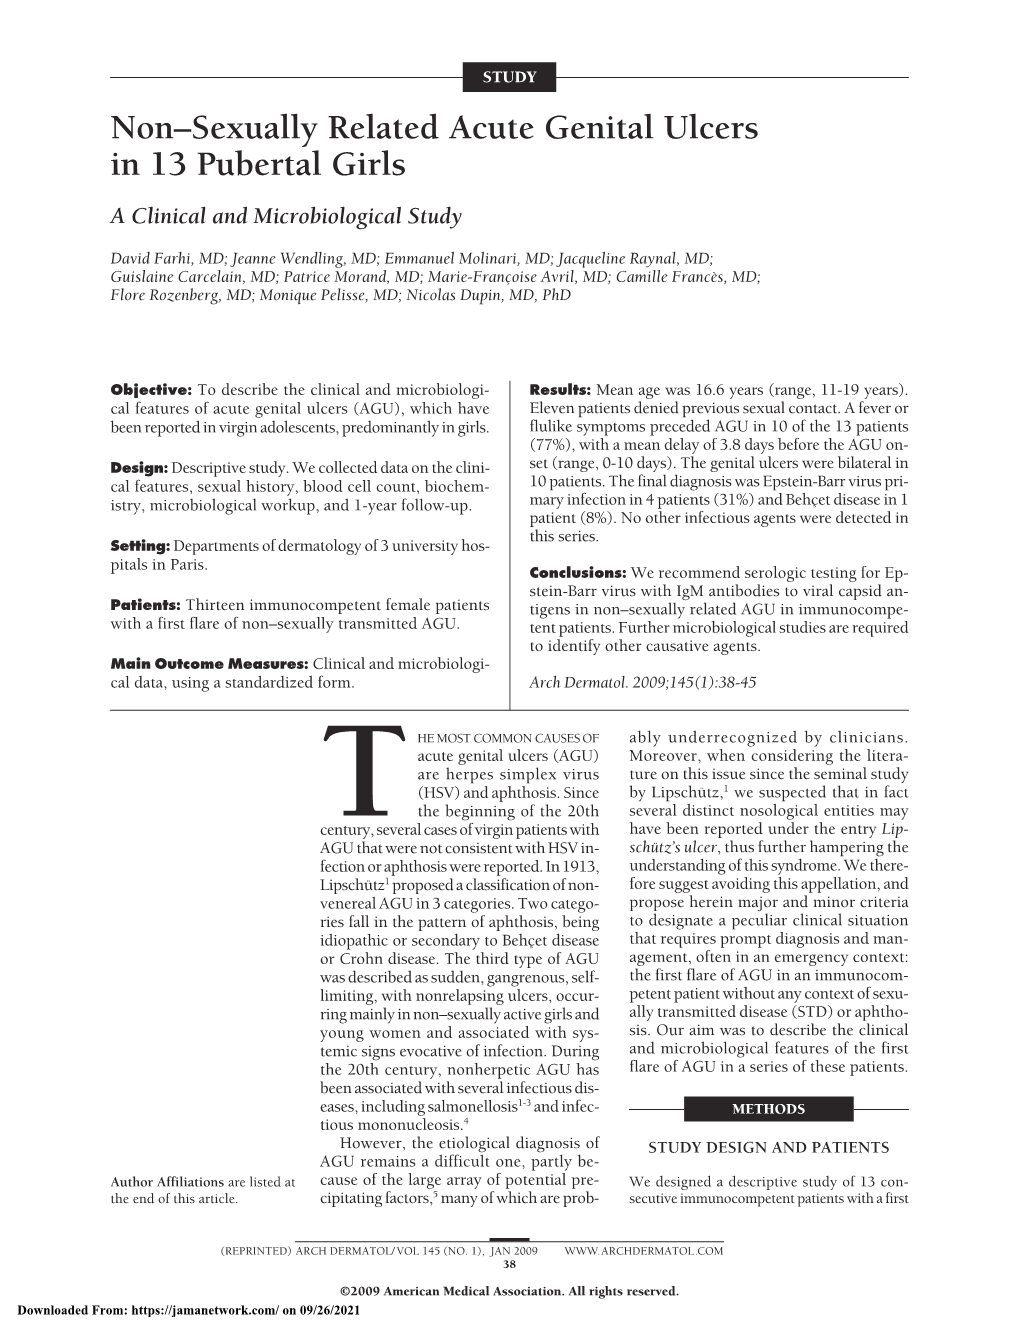 Non–Sexually Related Acute Genital Ulcers in 13 Pubertal Girls a Clinical and Microbiological Study